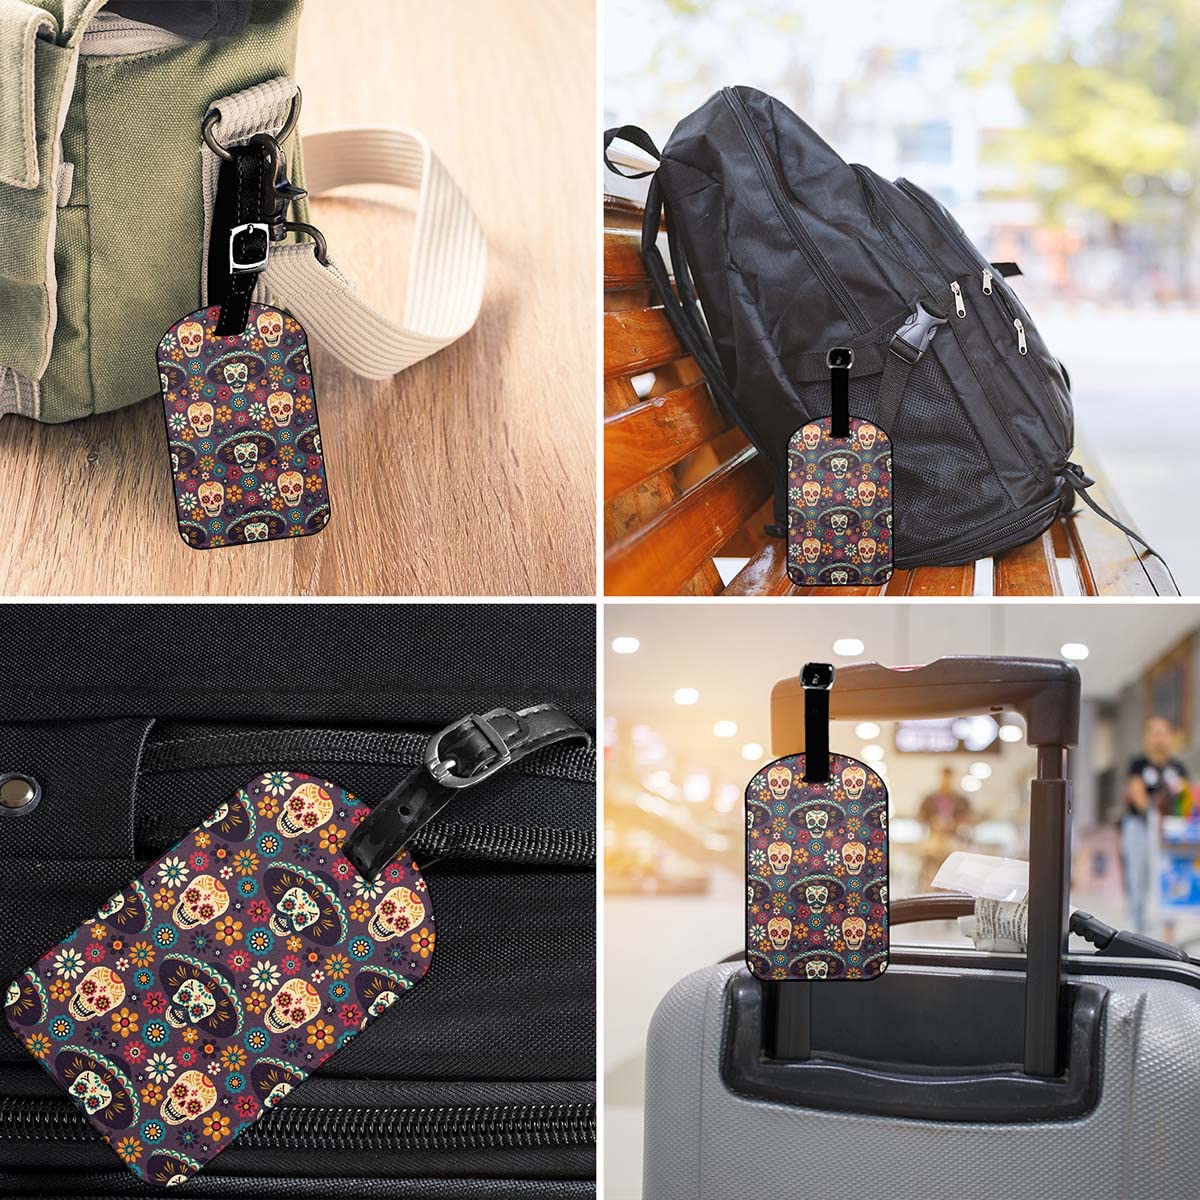 Zoczos Mexican Sugar Skulls Leather Luggage Travel Bag Tags Hat Floral Day of The Dead Skeleton Floral Design Luggage Tag Holder Name ID Labels Set for Men Women Kids, 1 Pack